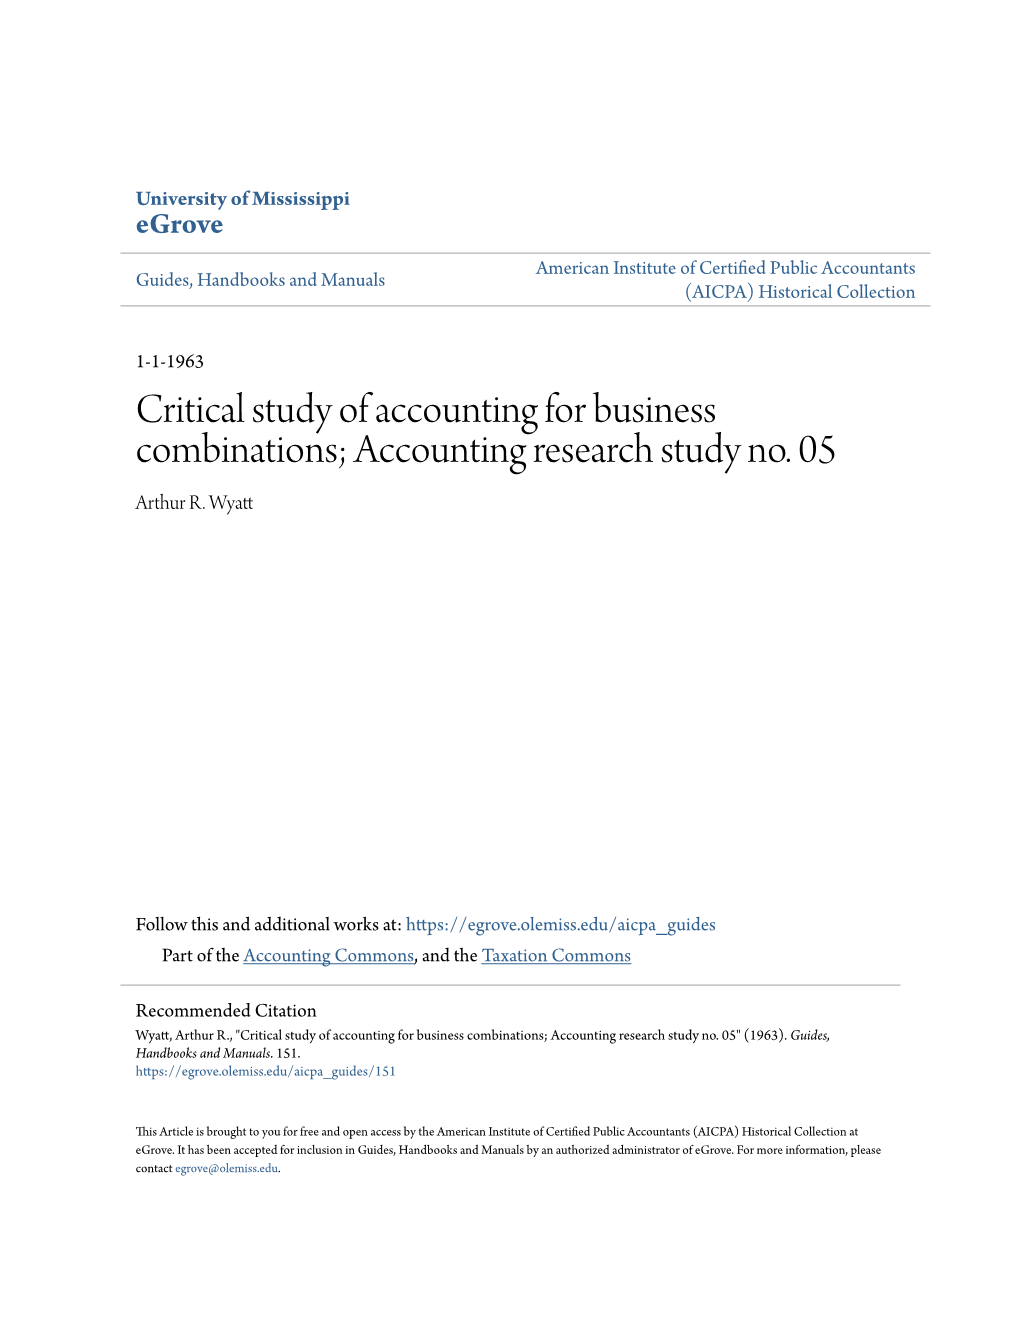 Critical Study of Accounting for Business Combinations; Accounting Research Study No